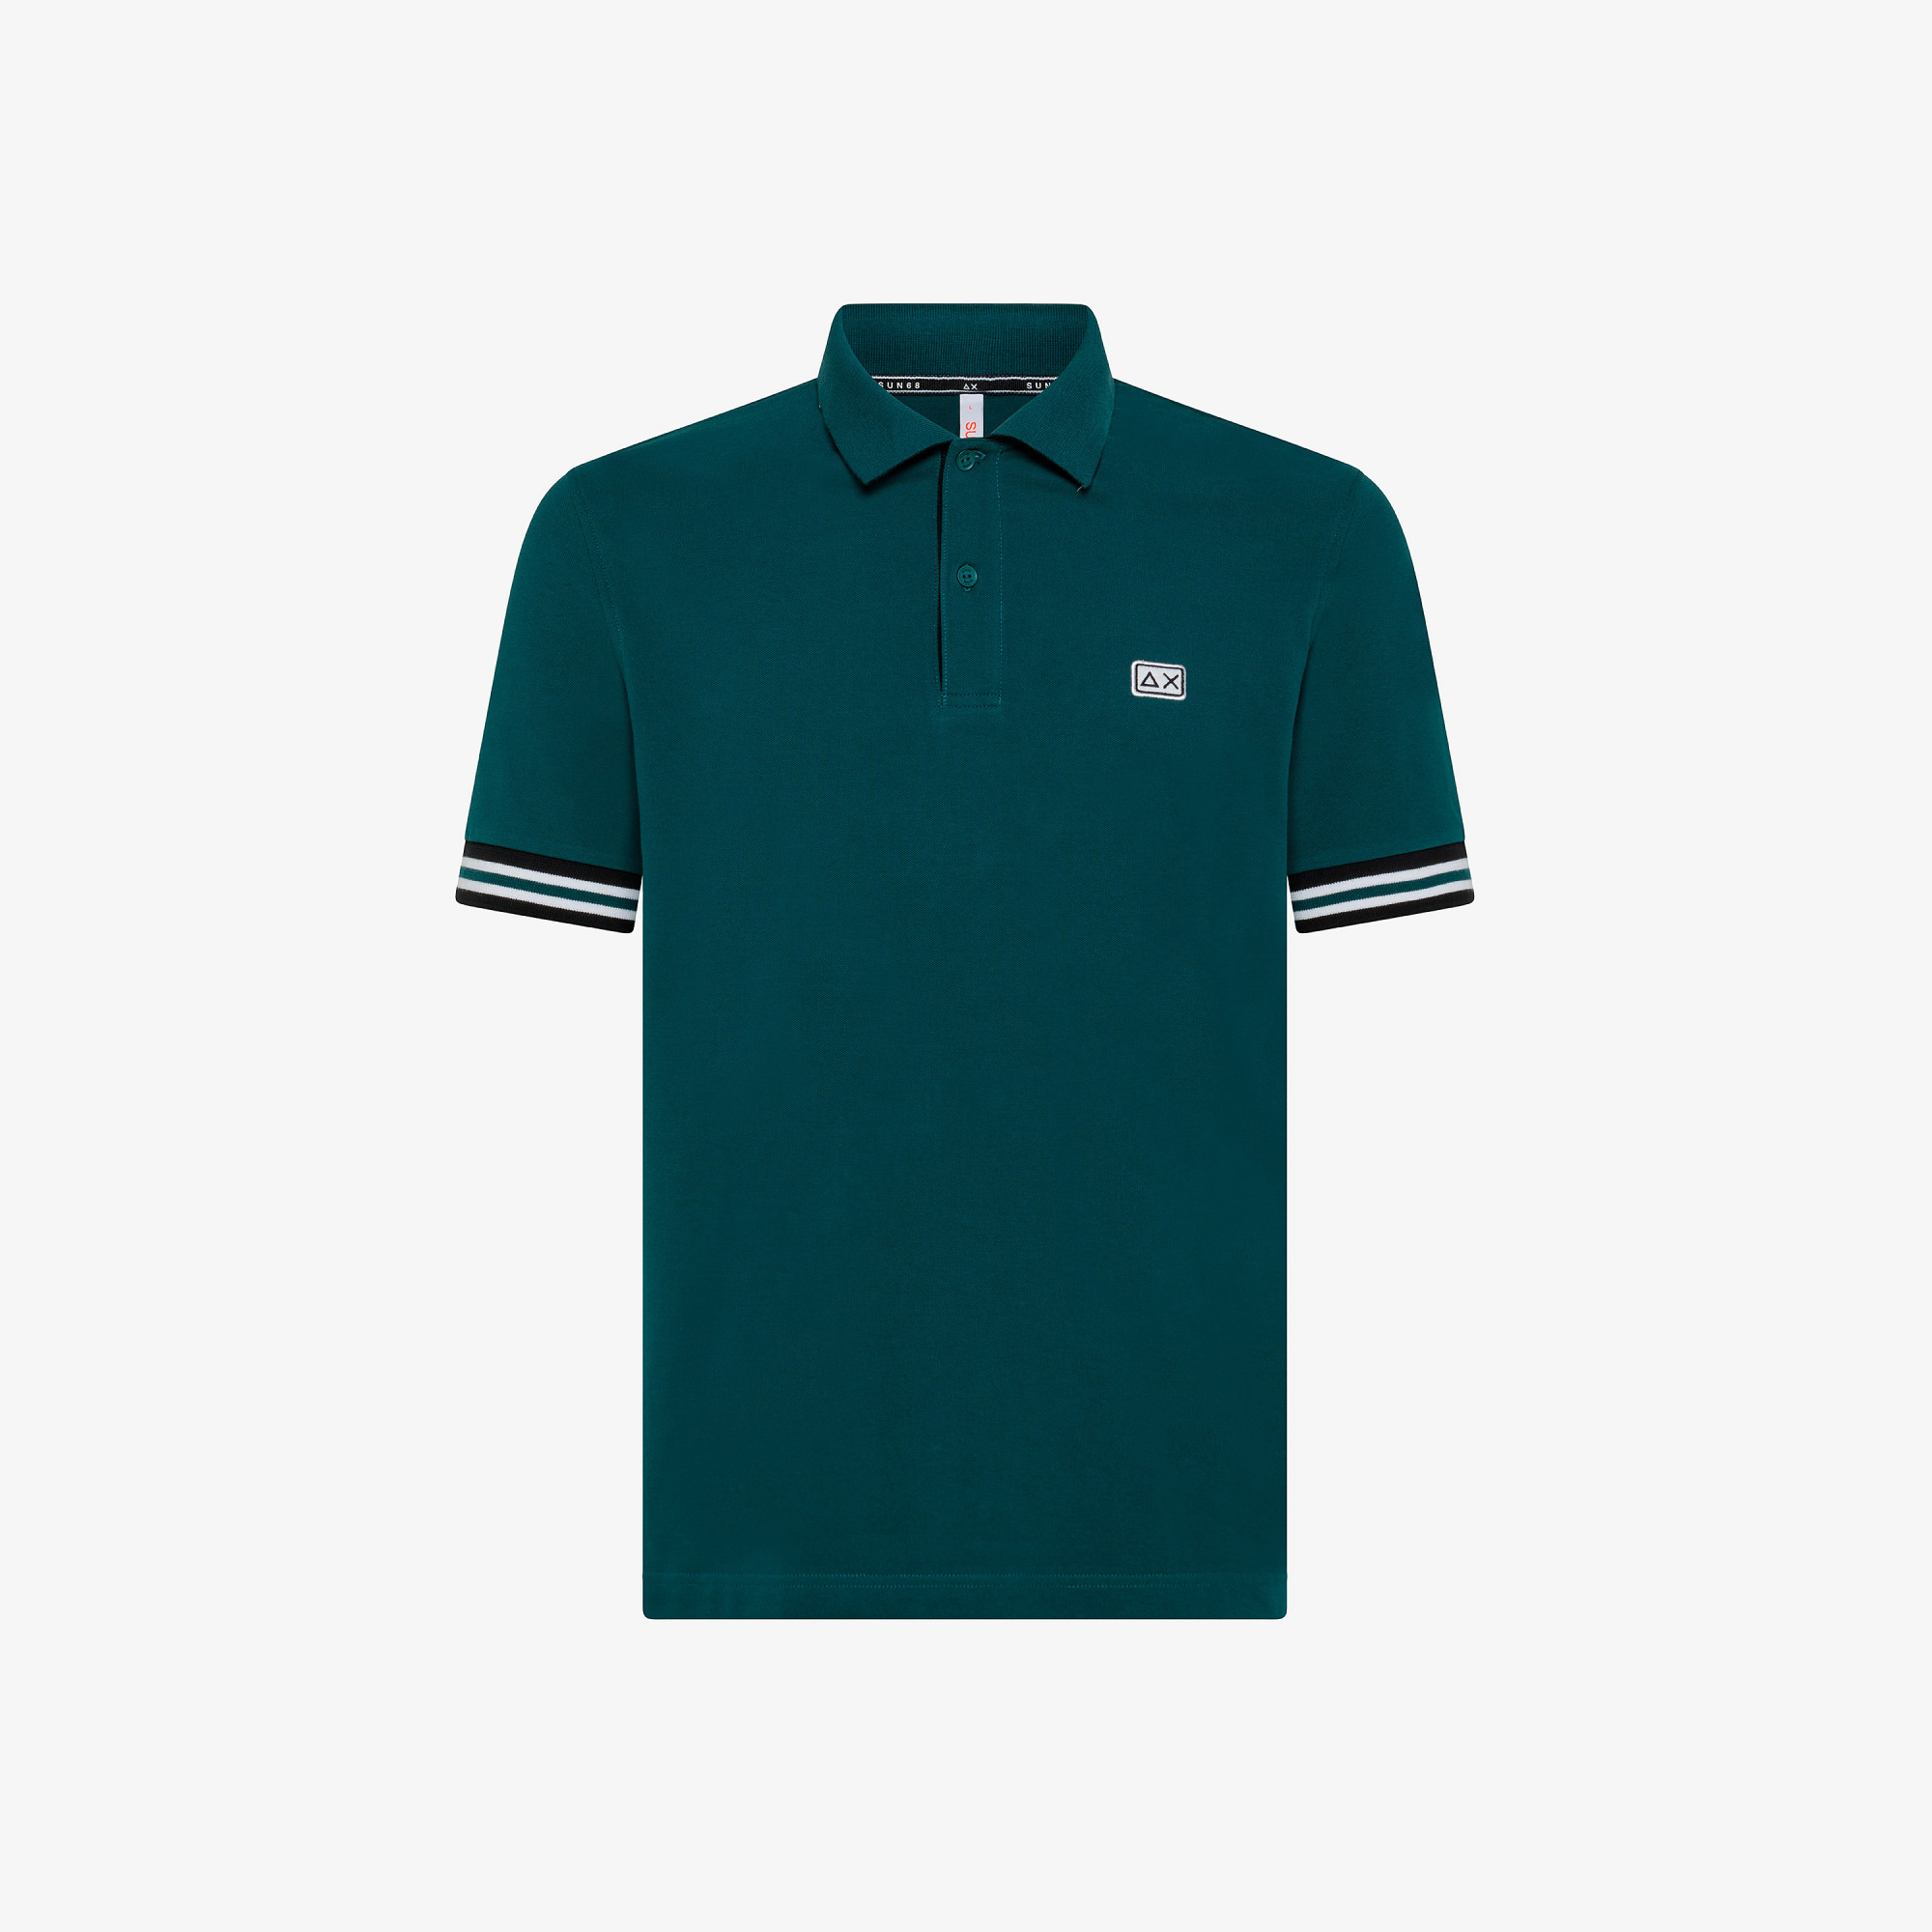 POLO STRIPES ON FRONT PLACKET AND CUFFS EL. ENGLISH GREEN